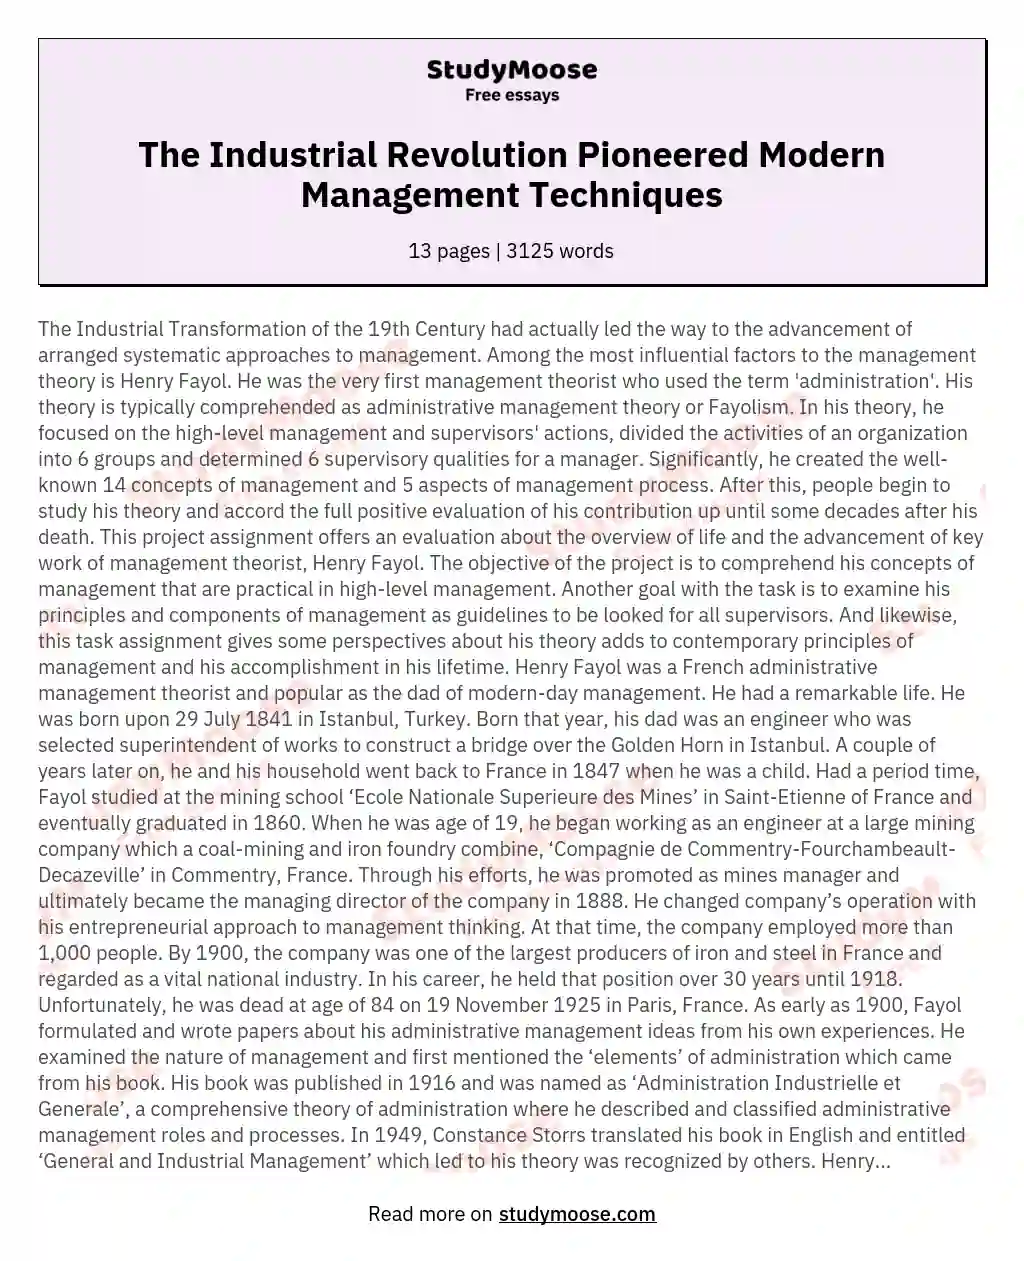 The Industrial Revolution Pioneered Modern Management Techniques essay